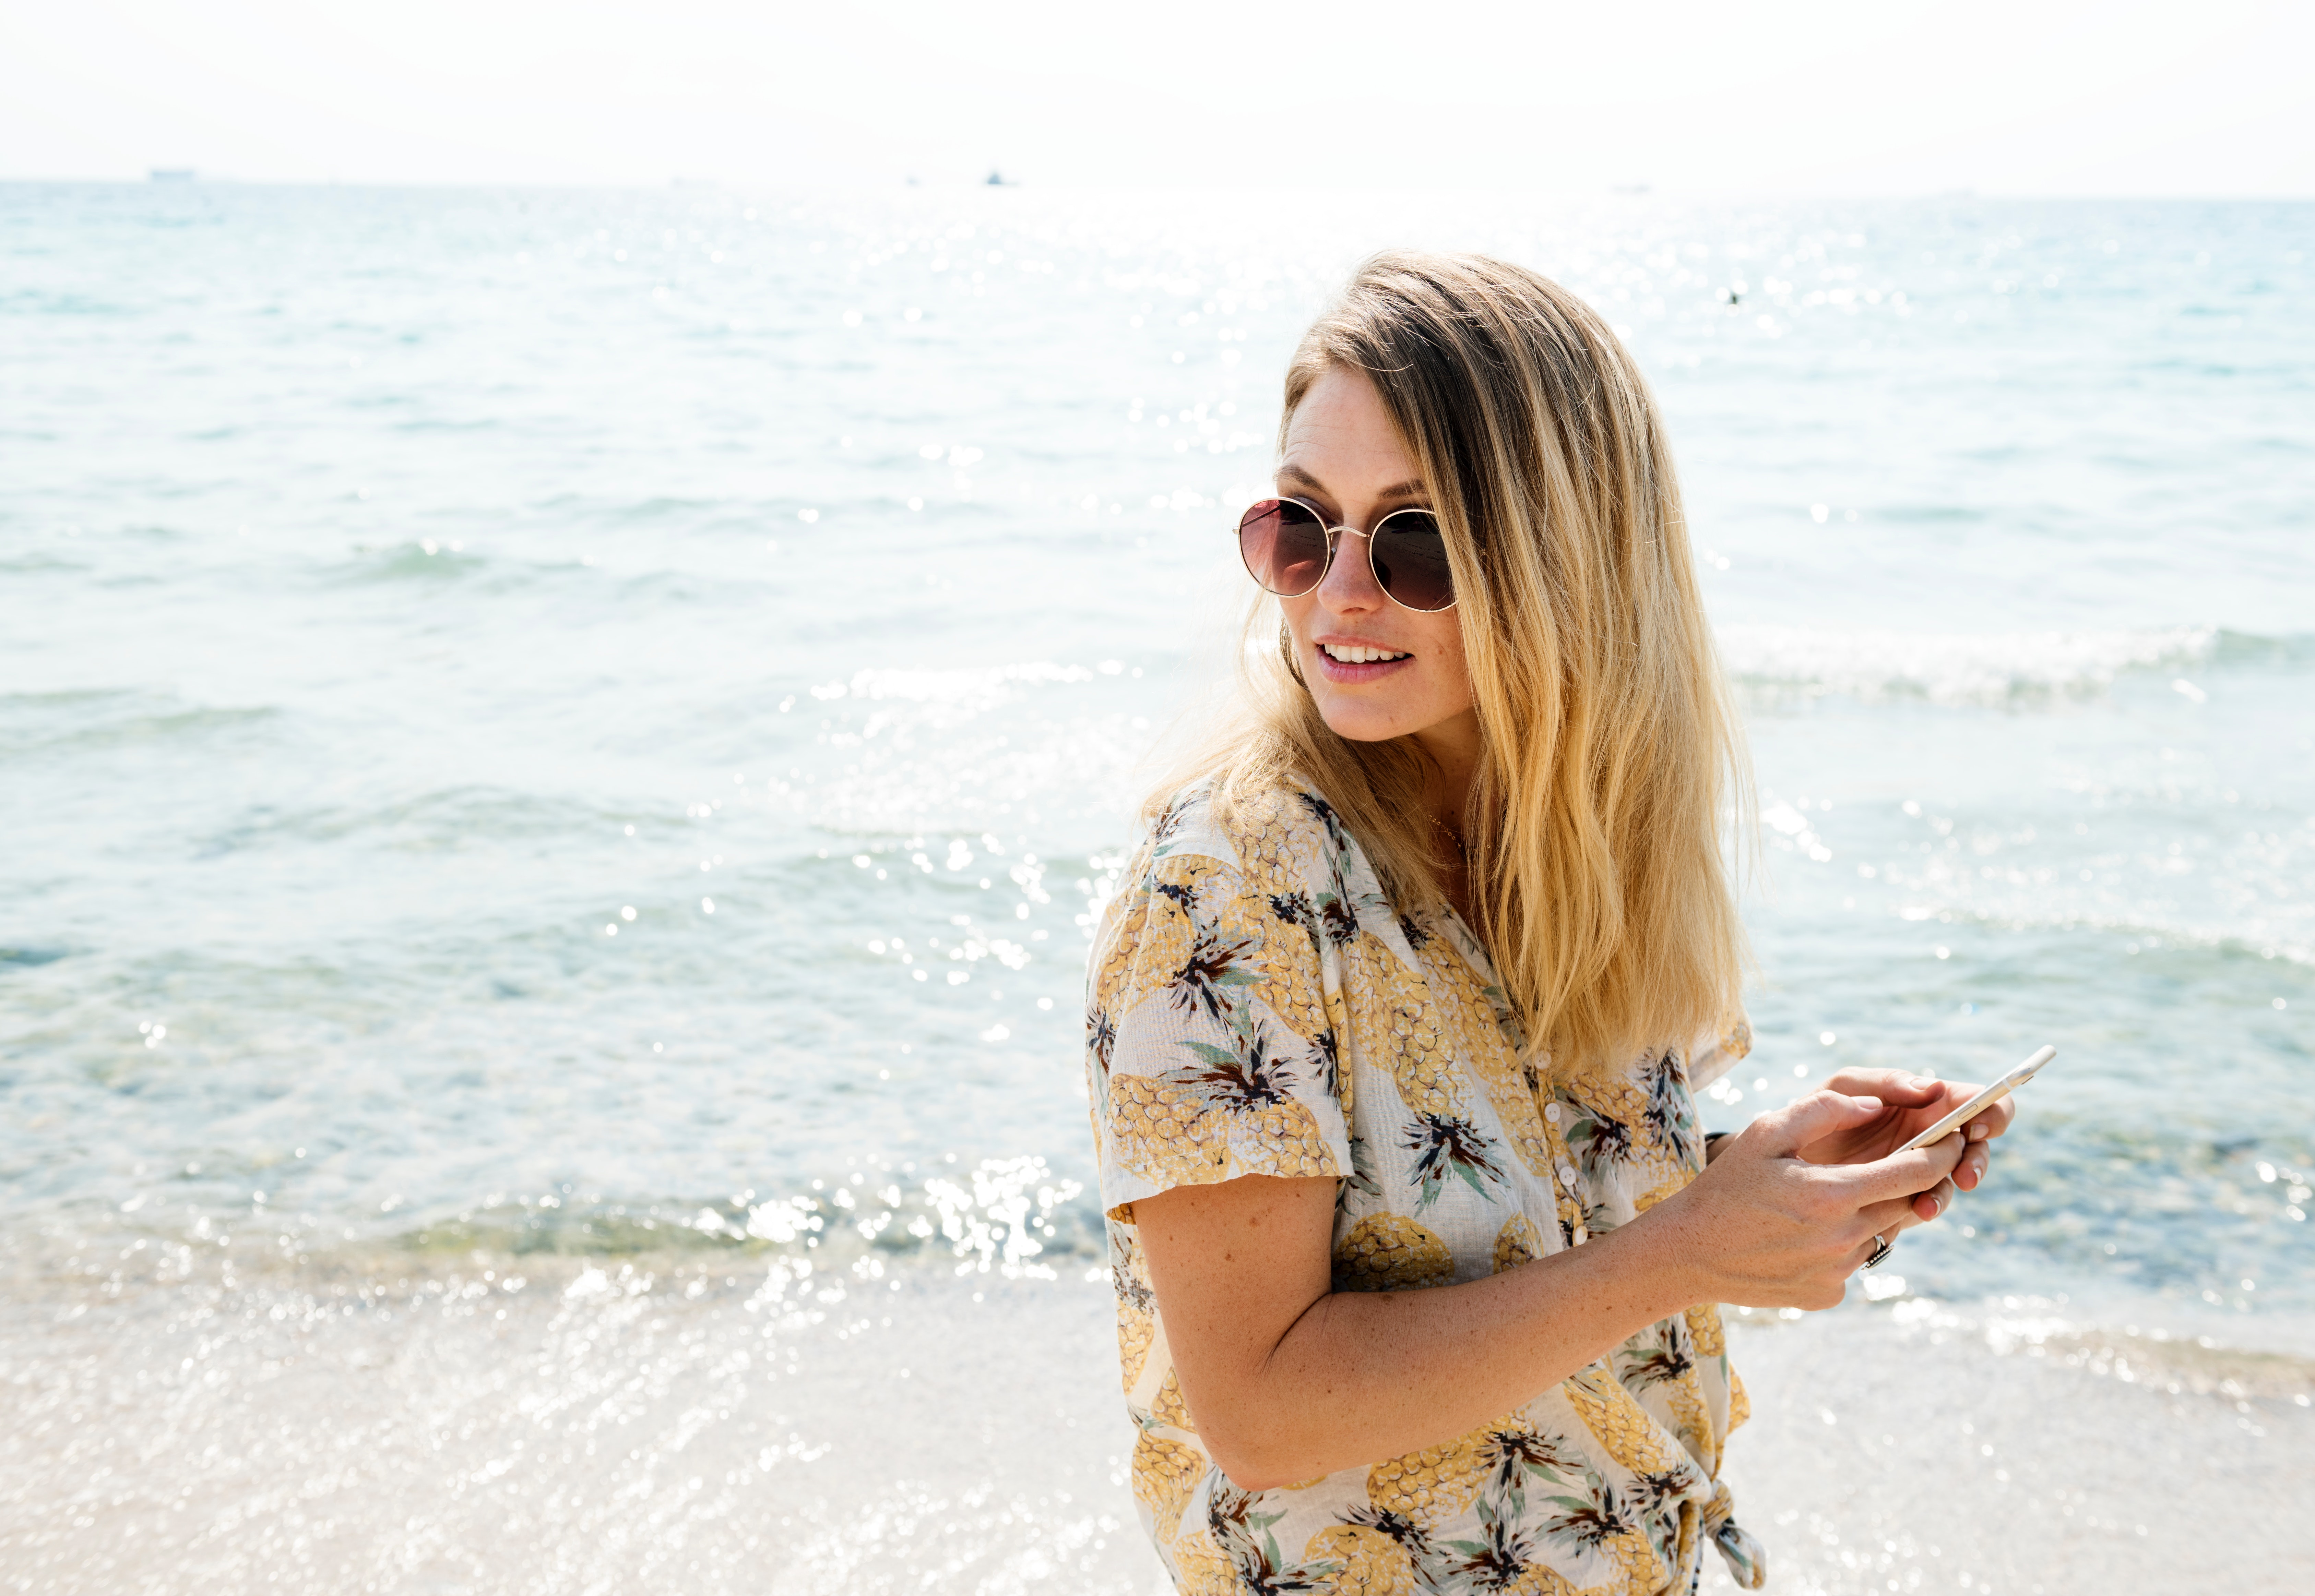 Woman in Black Yellow and White Floral Button-up Shirt Holding Smartphone Wearing Aviator Sunglasses Near Body of Water, Adventure, Tour, Sea, Seashore, HQ Photo